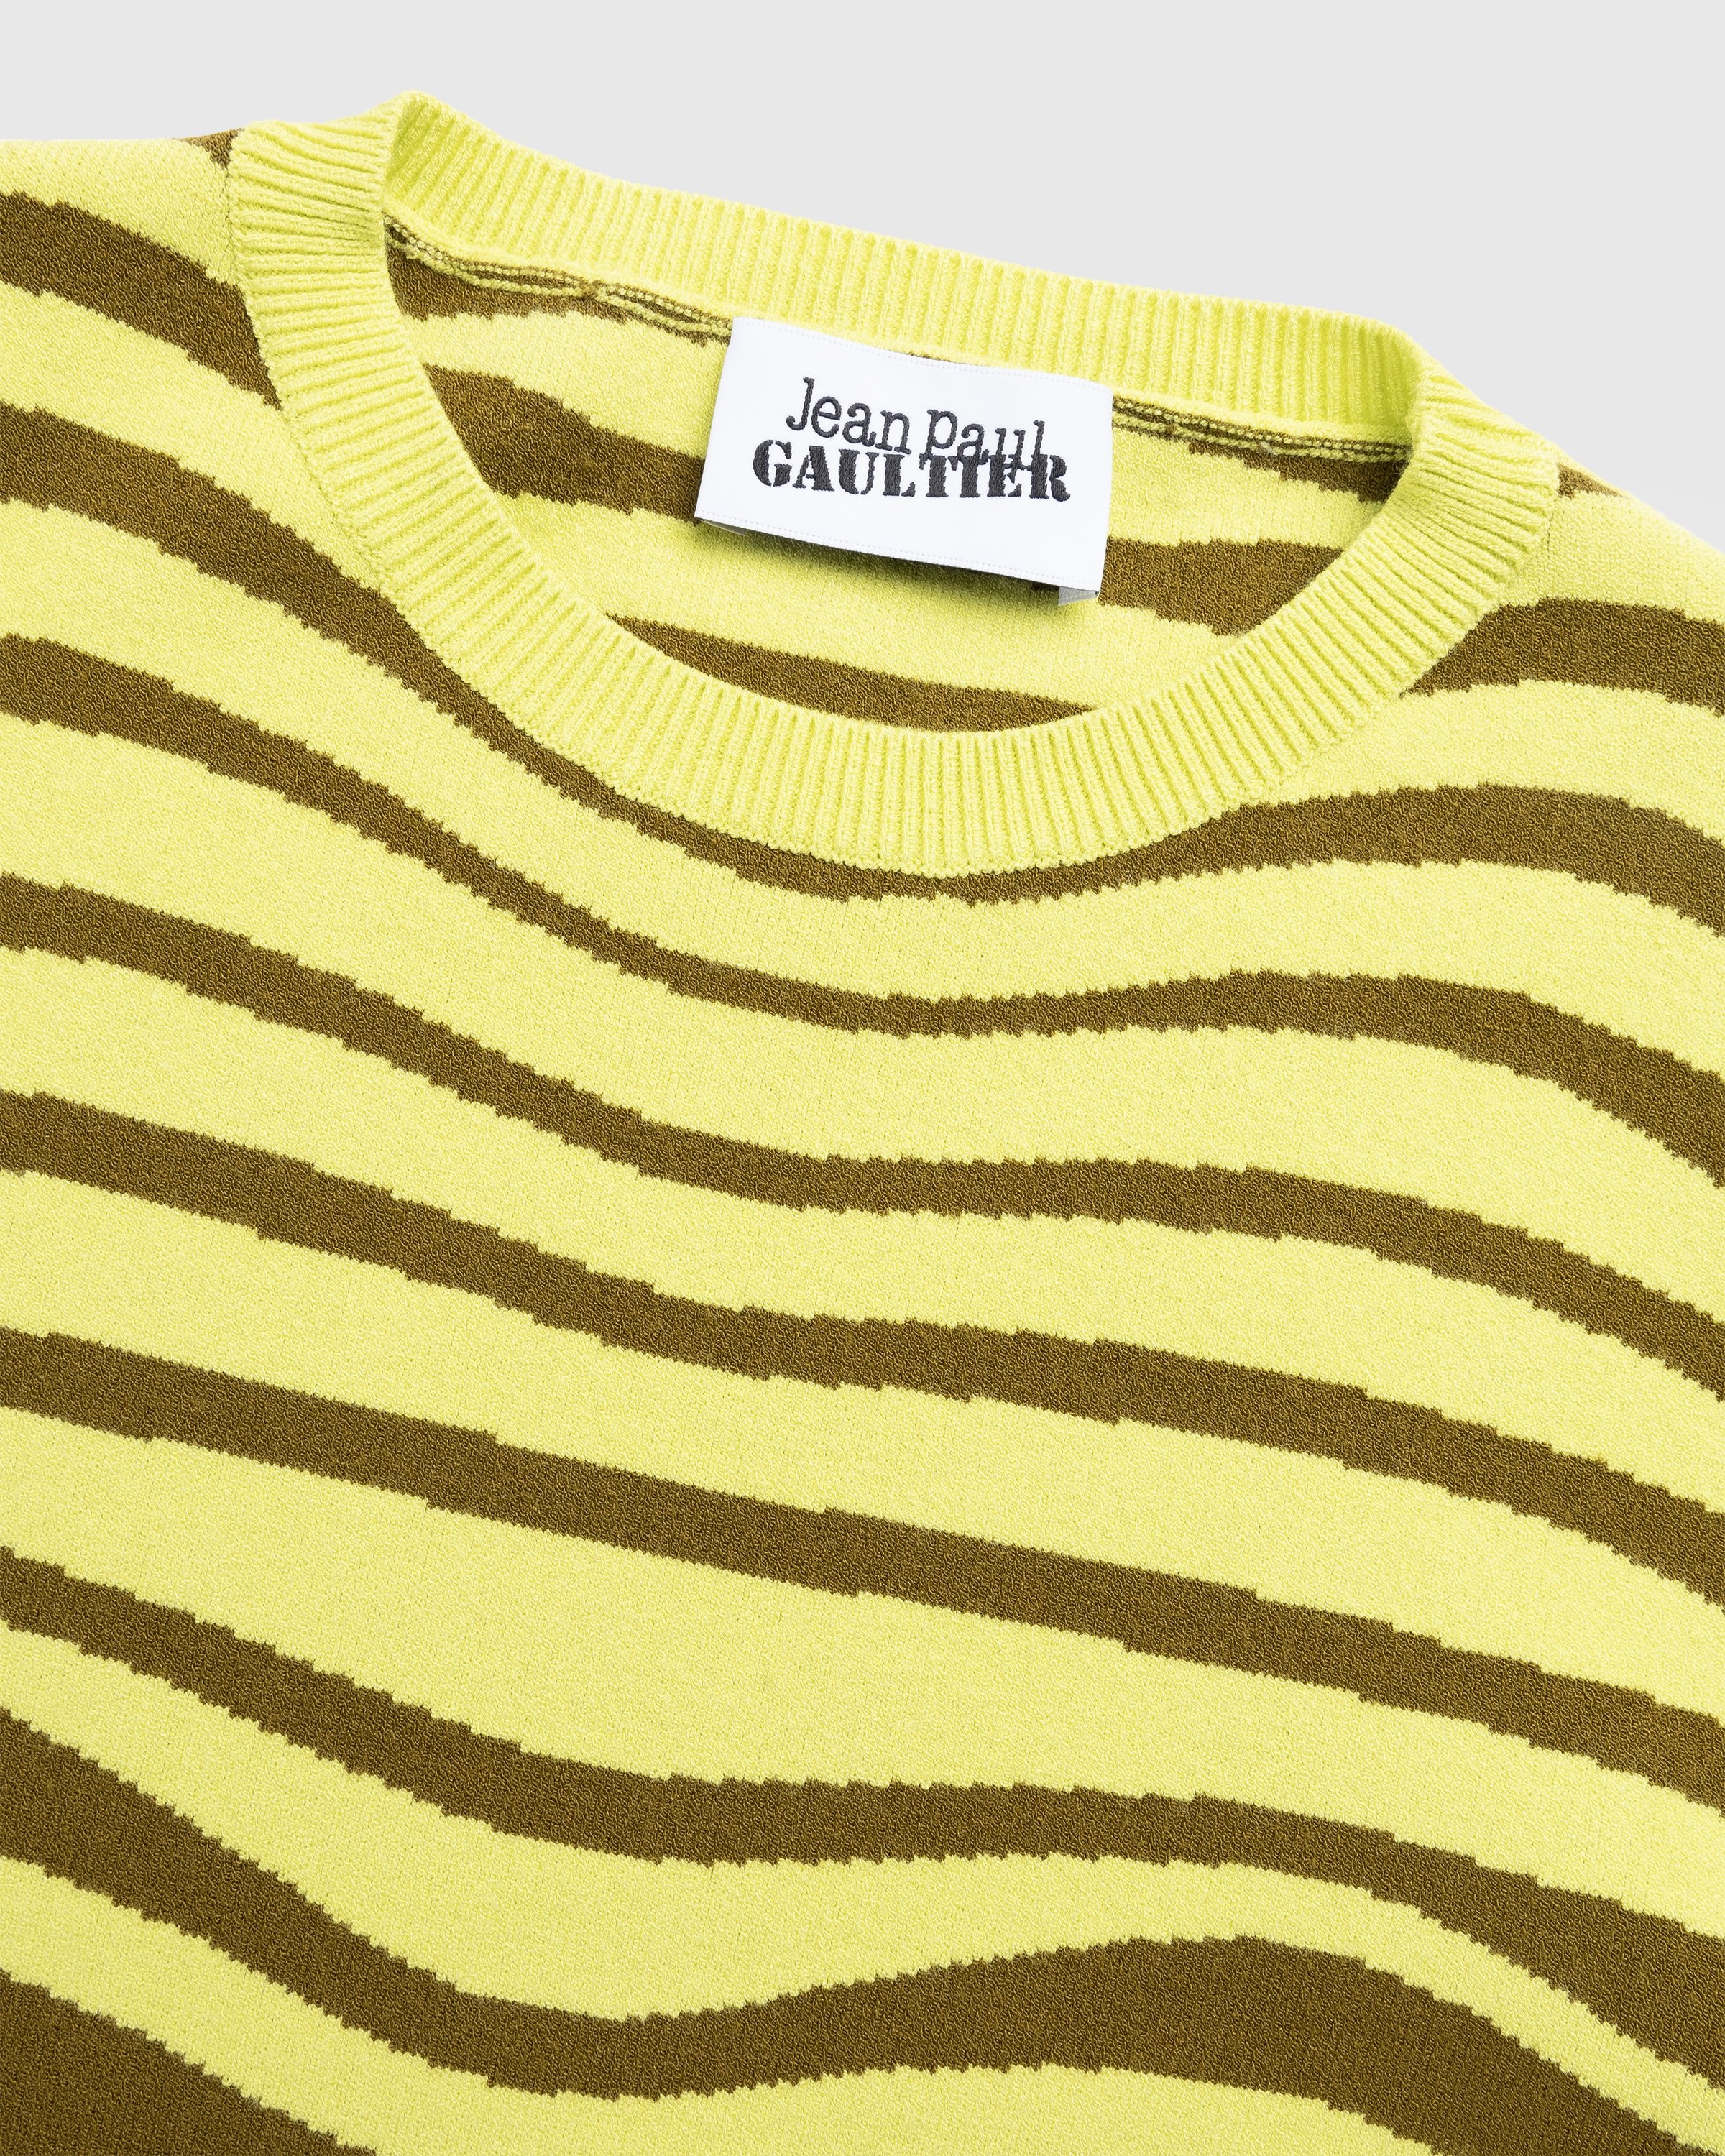 Jean Paul Gaultier – Long Sleeves Crew Neck Morphing Stripes Green